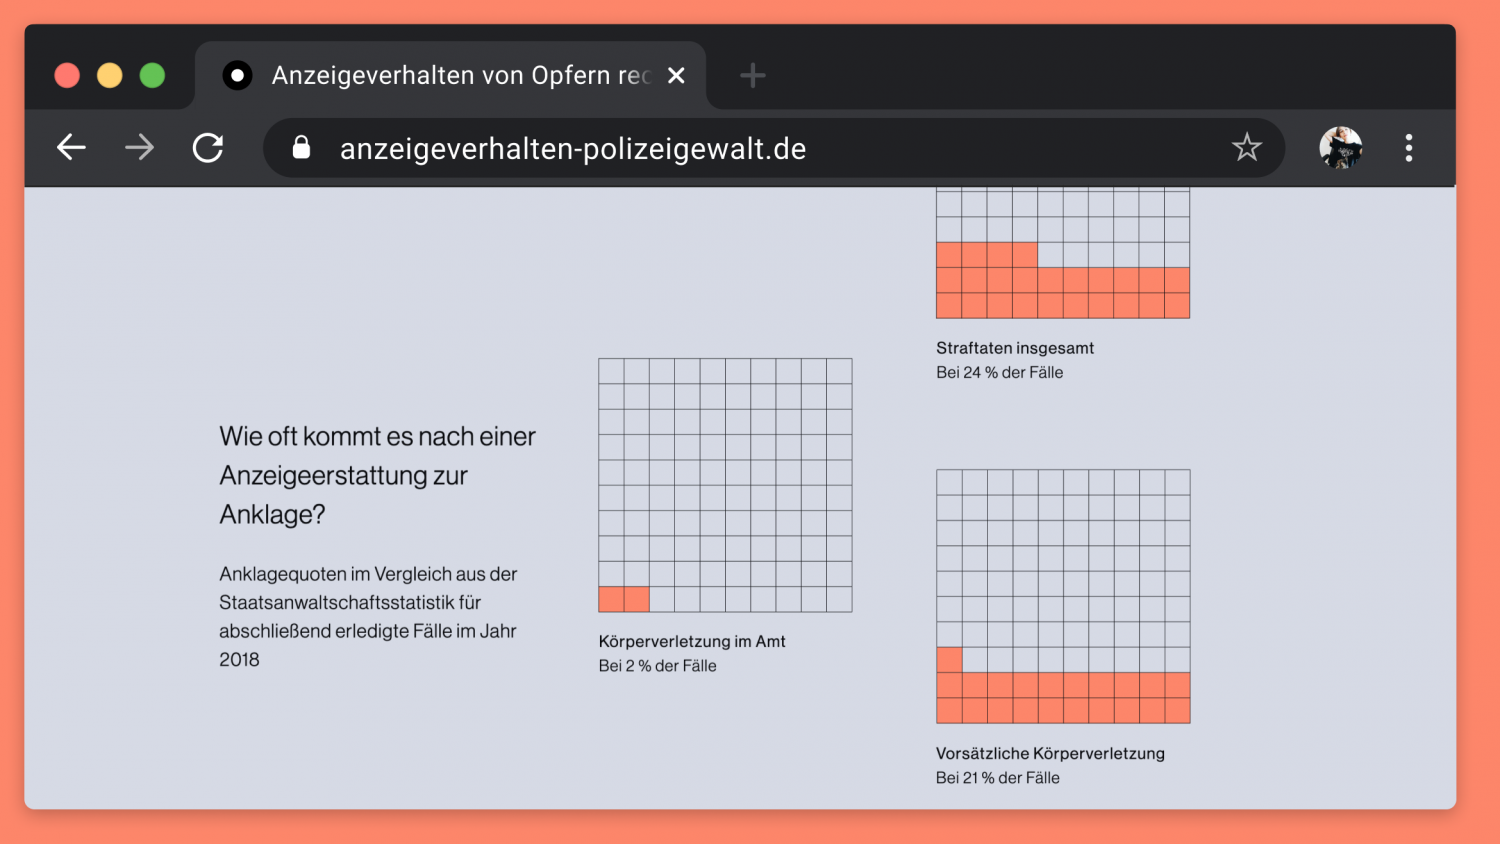 Visualizing crime reporting behaviour of victims of unlawful police violence in Germany